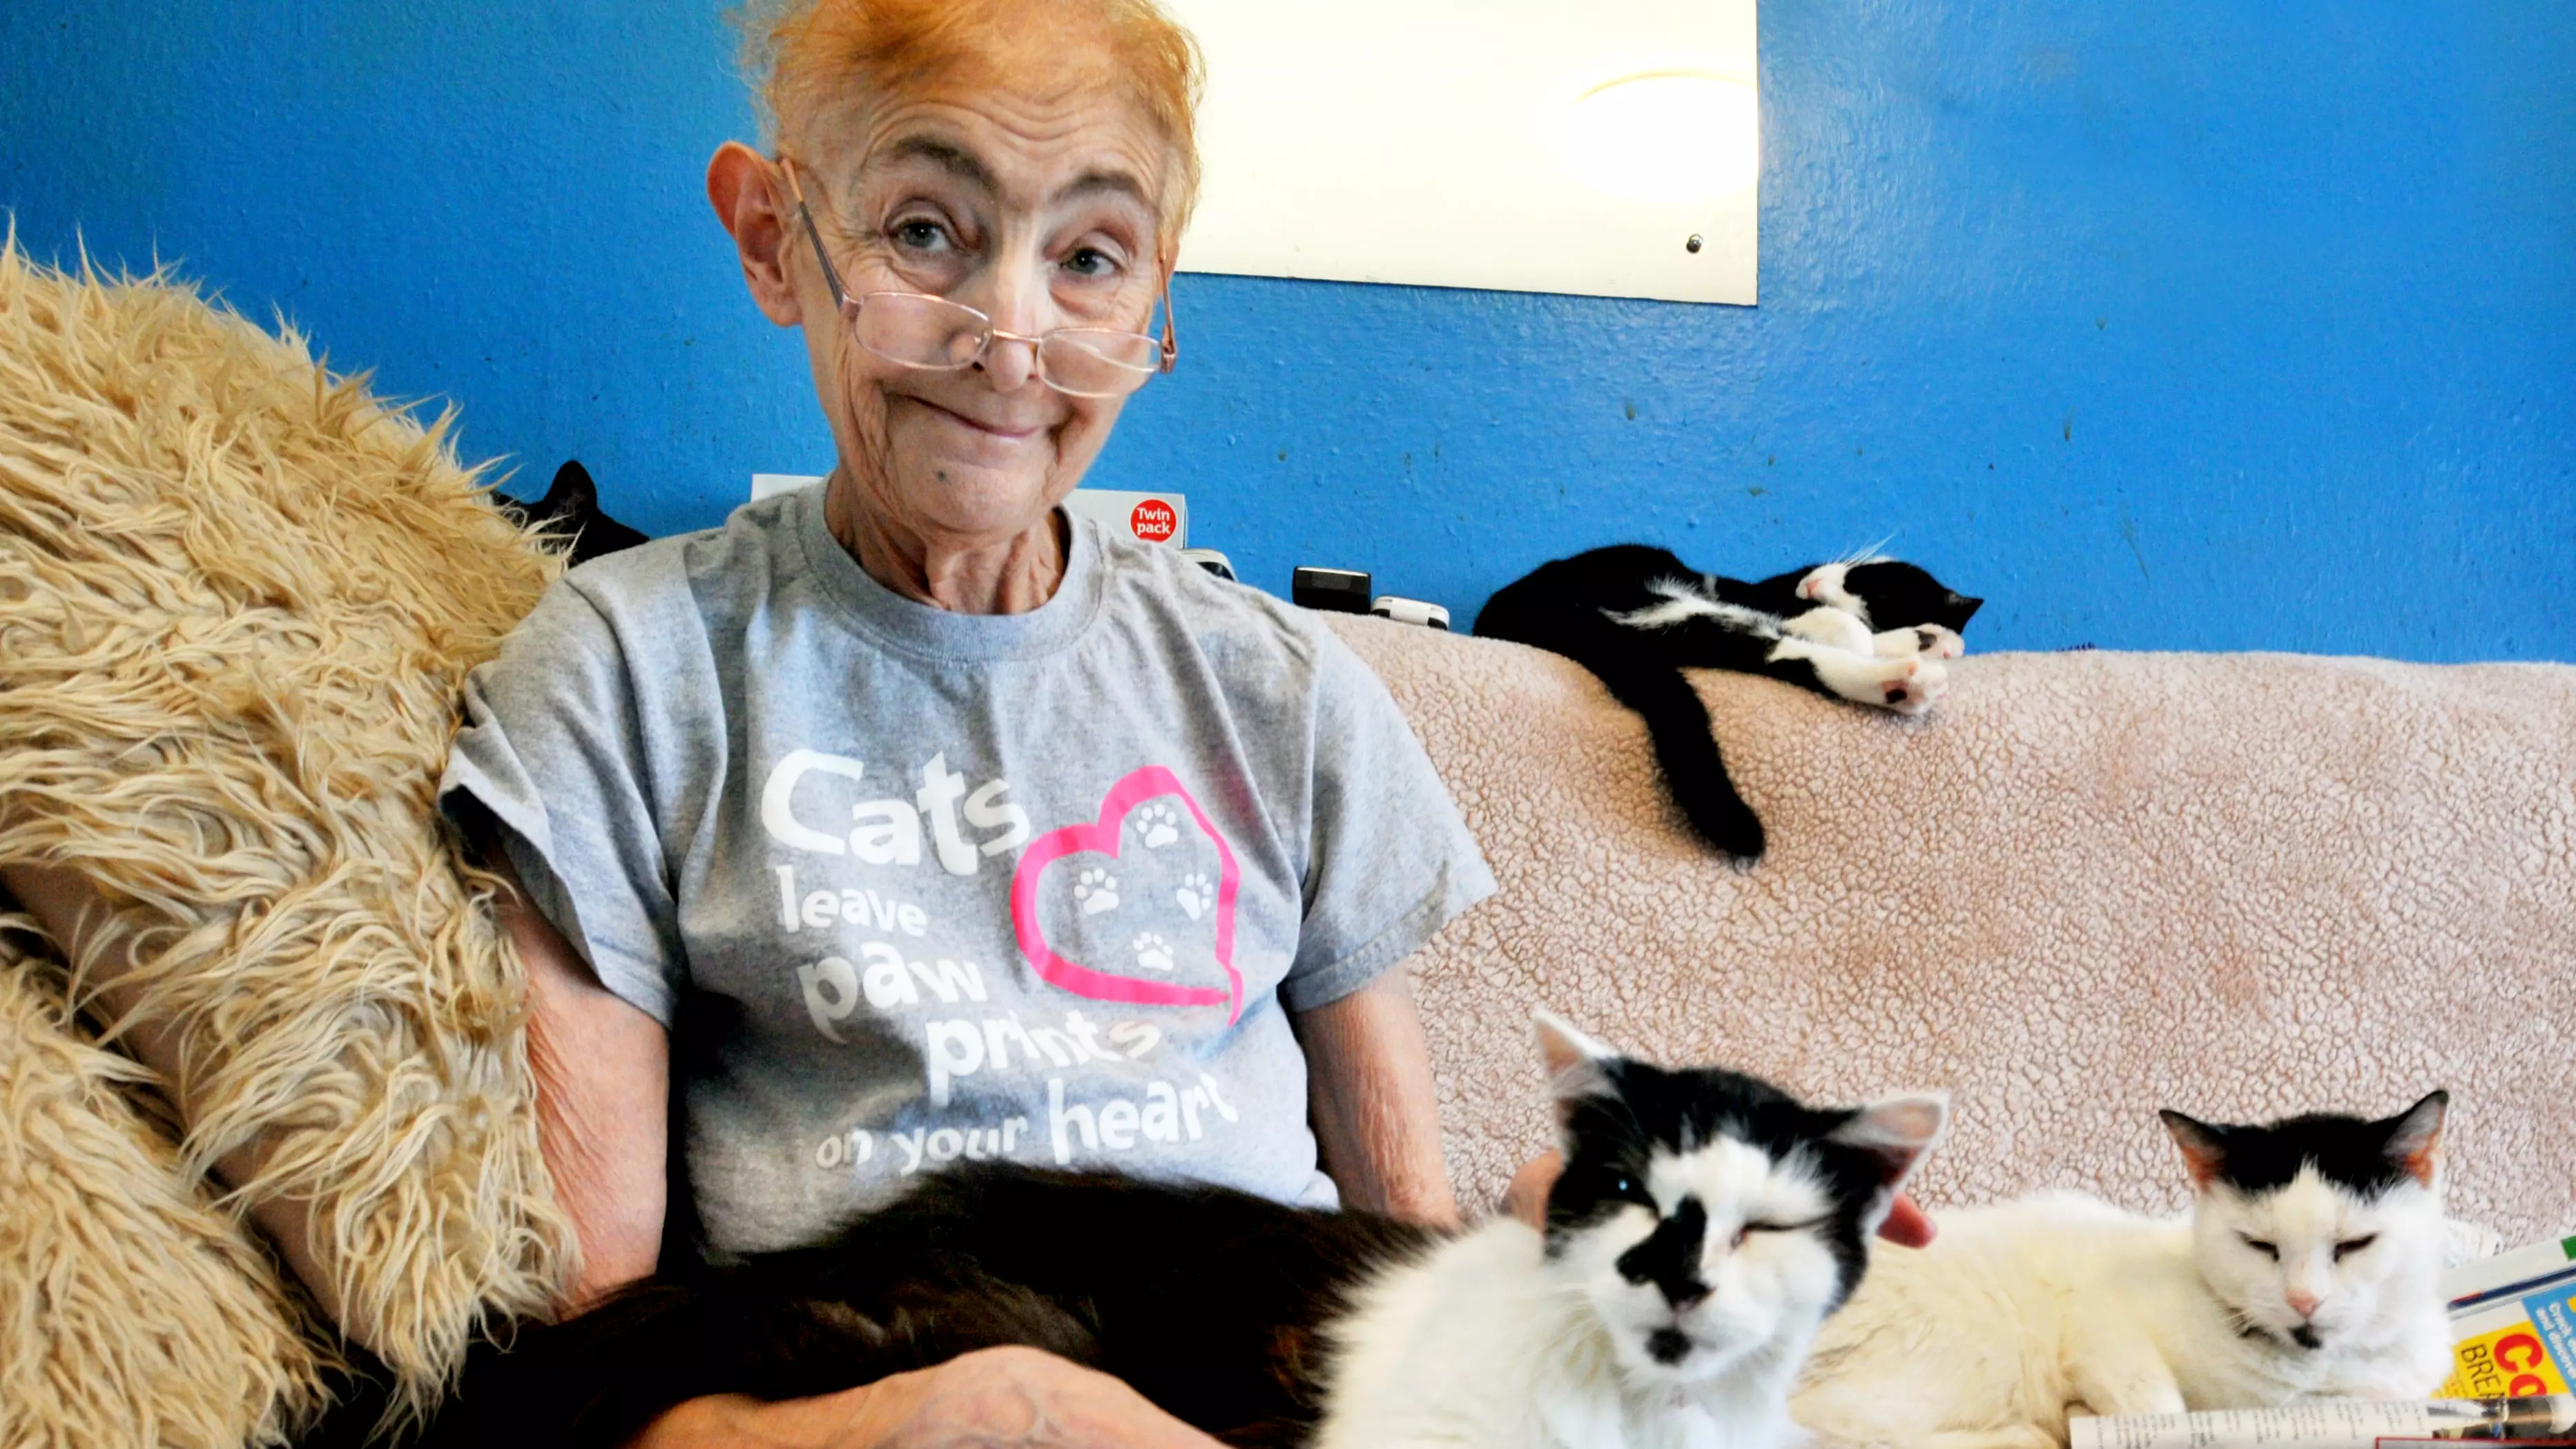 Woman With Terminal Cancer Urgently Needs To Rehome Her 40 Cats